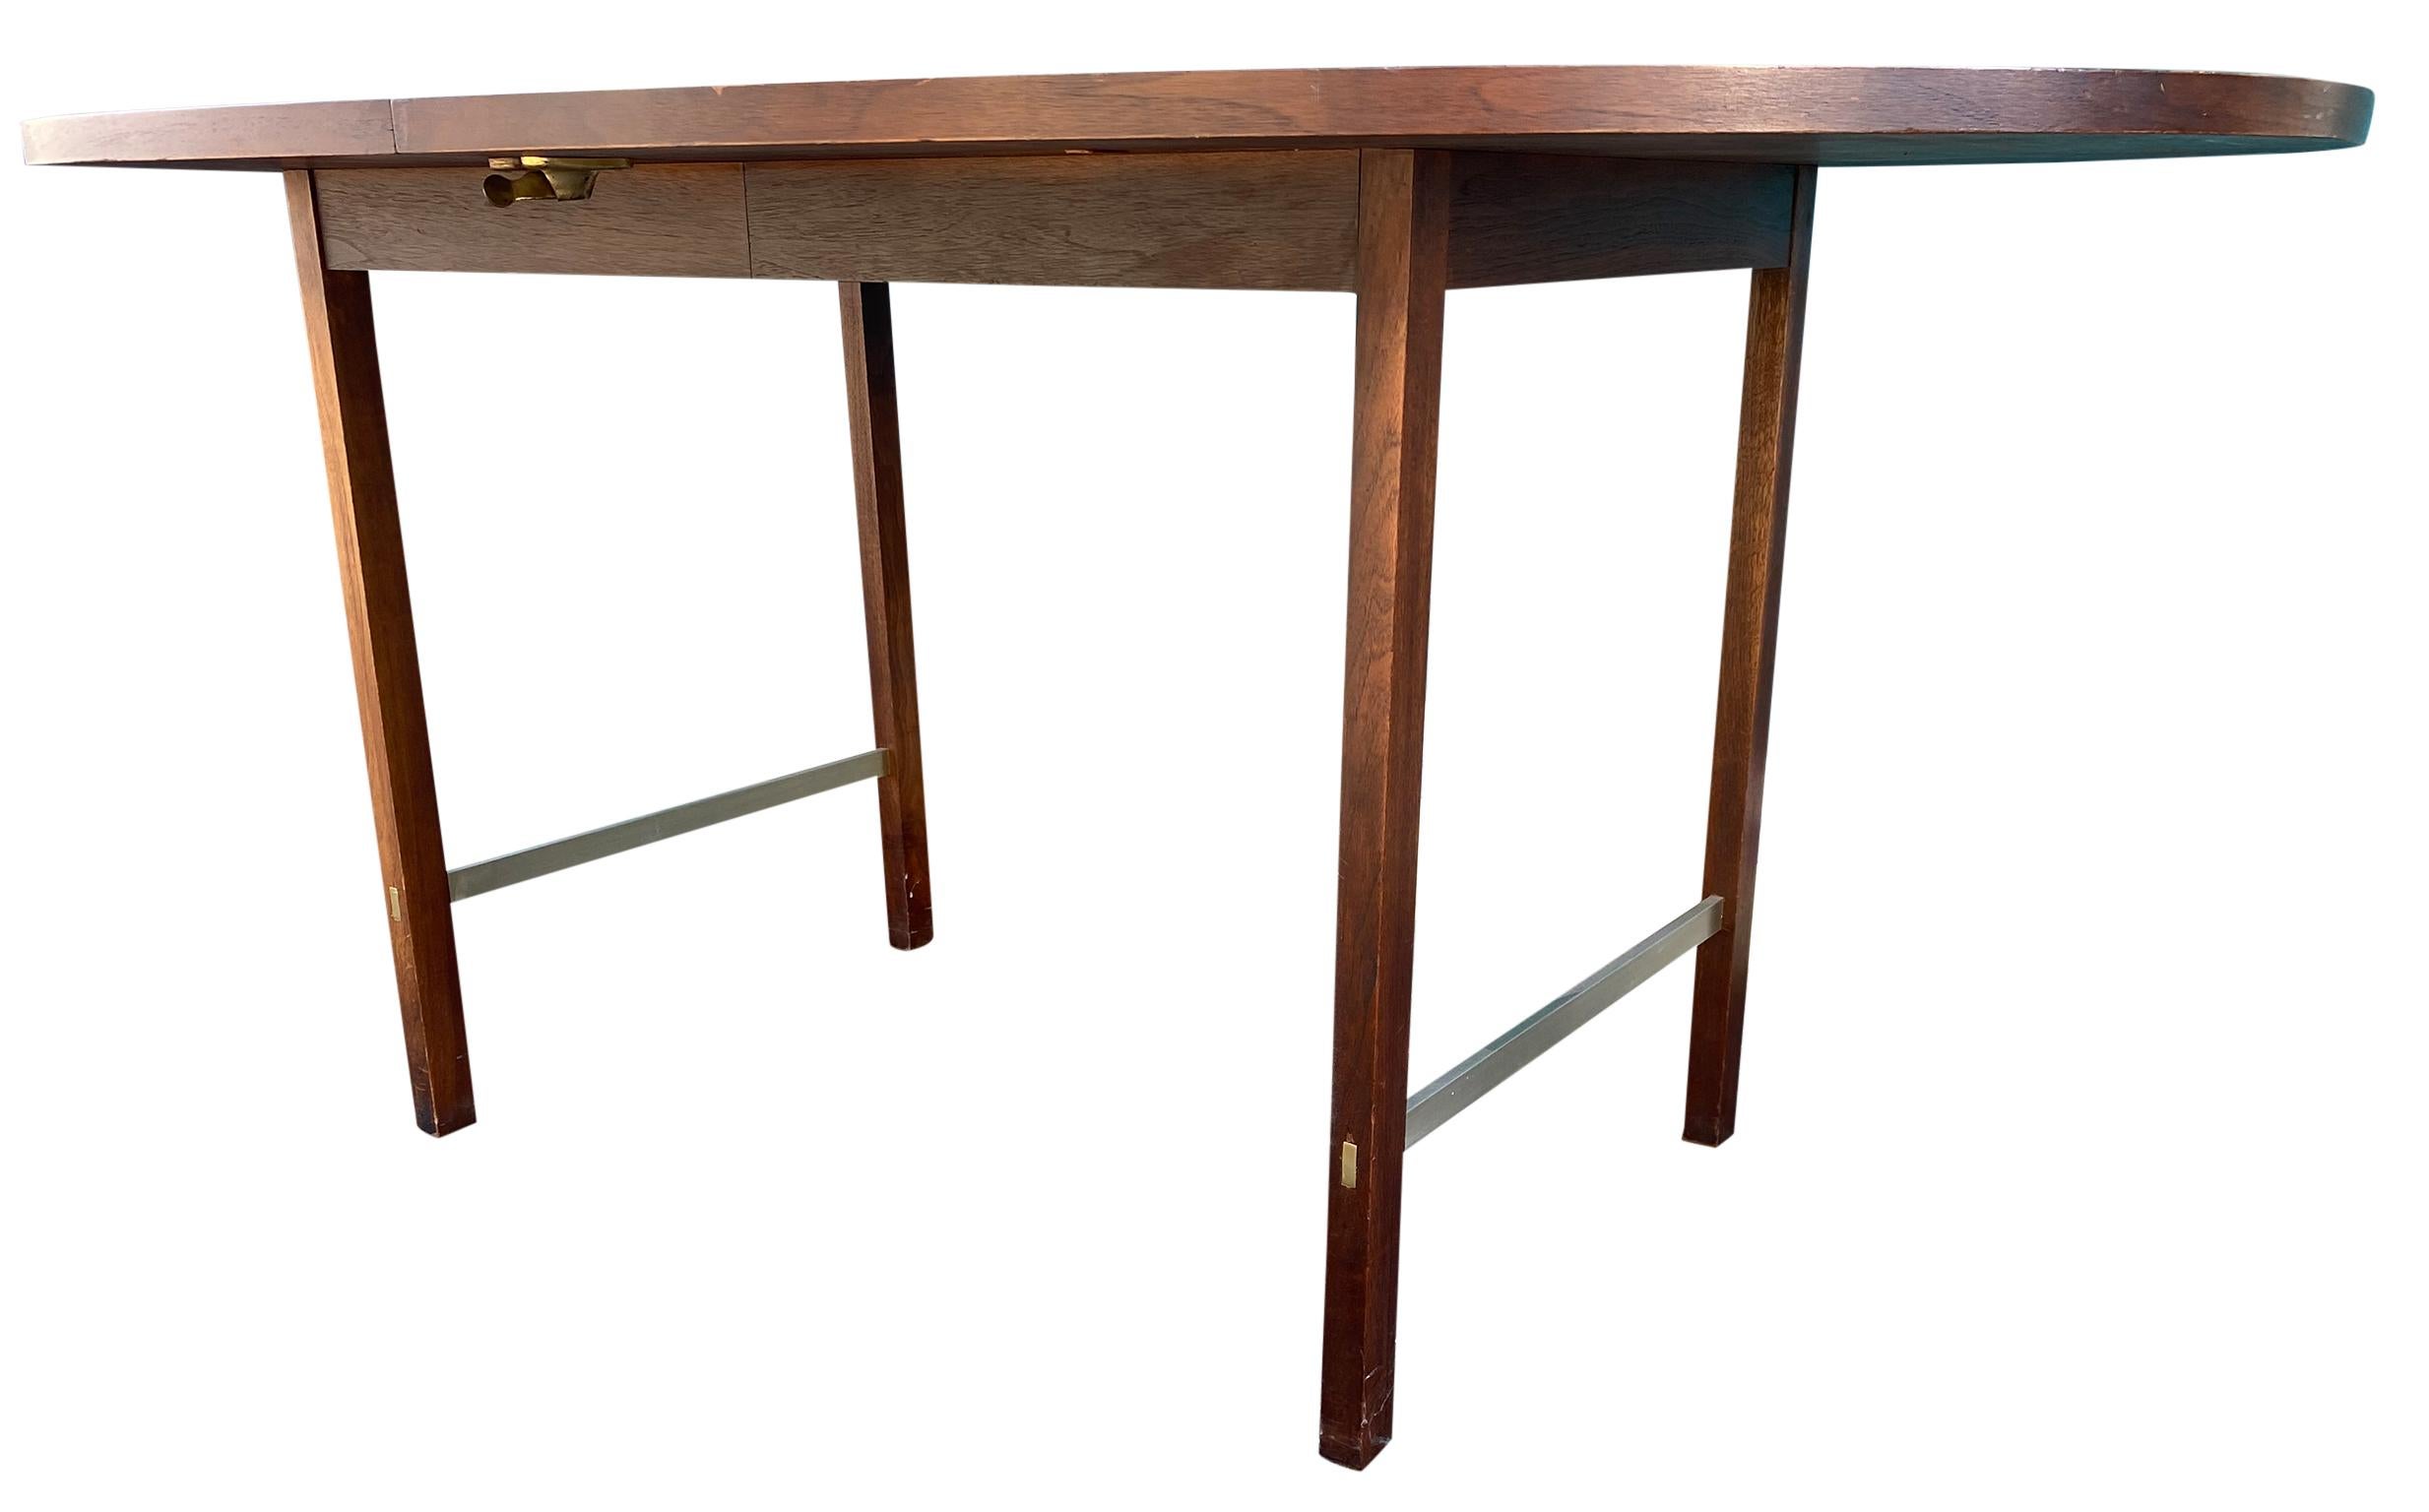 Mid-20th Century Mid-Century Modern Walnut Dining Table by Paul McCobb for Calvin 2 Leaves For Sale